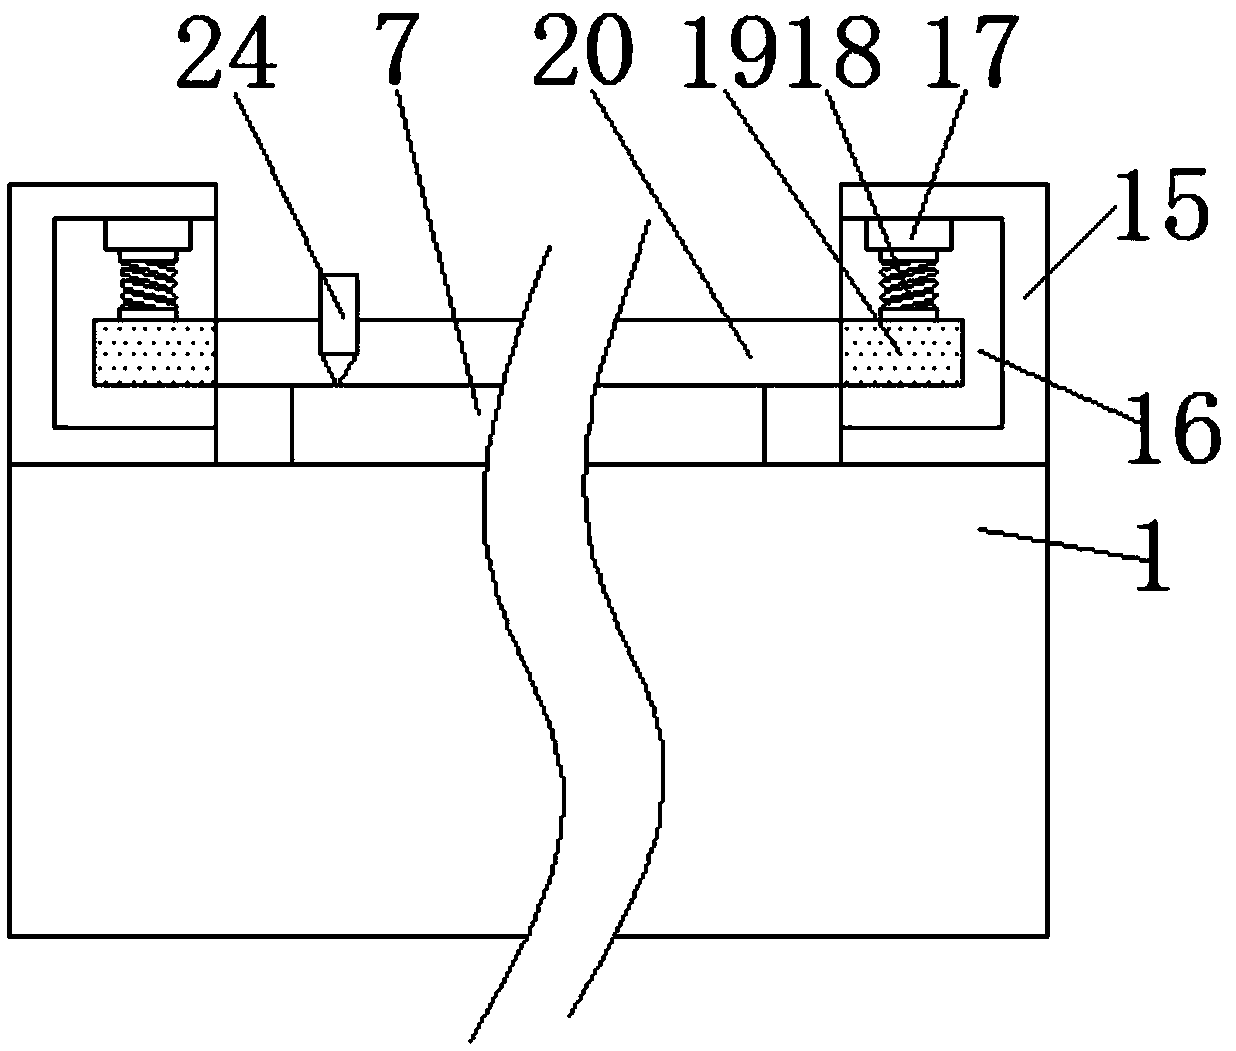 Device for cutting textiles